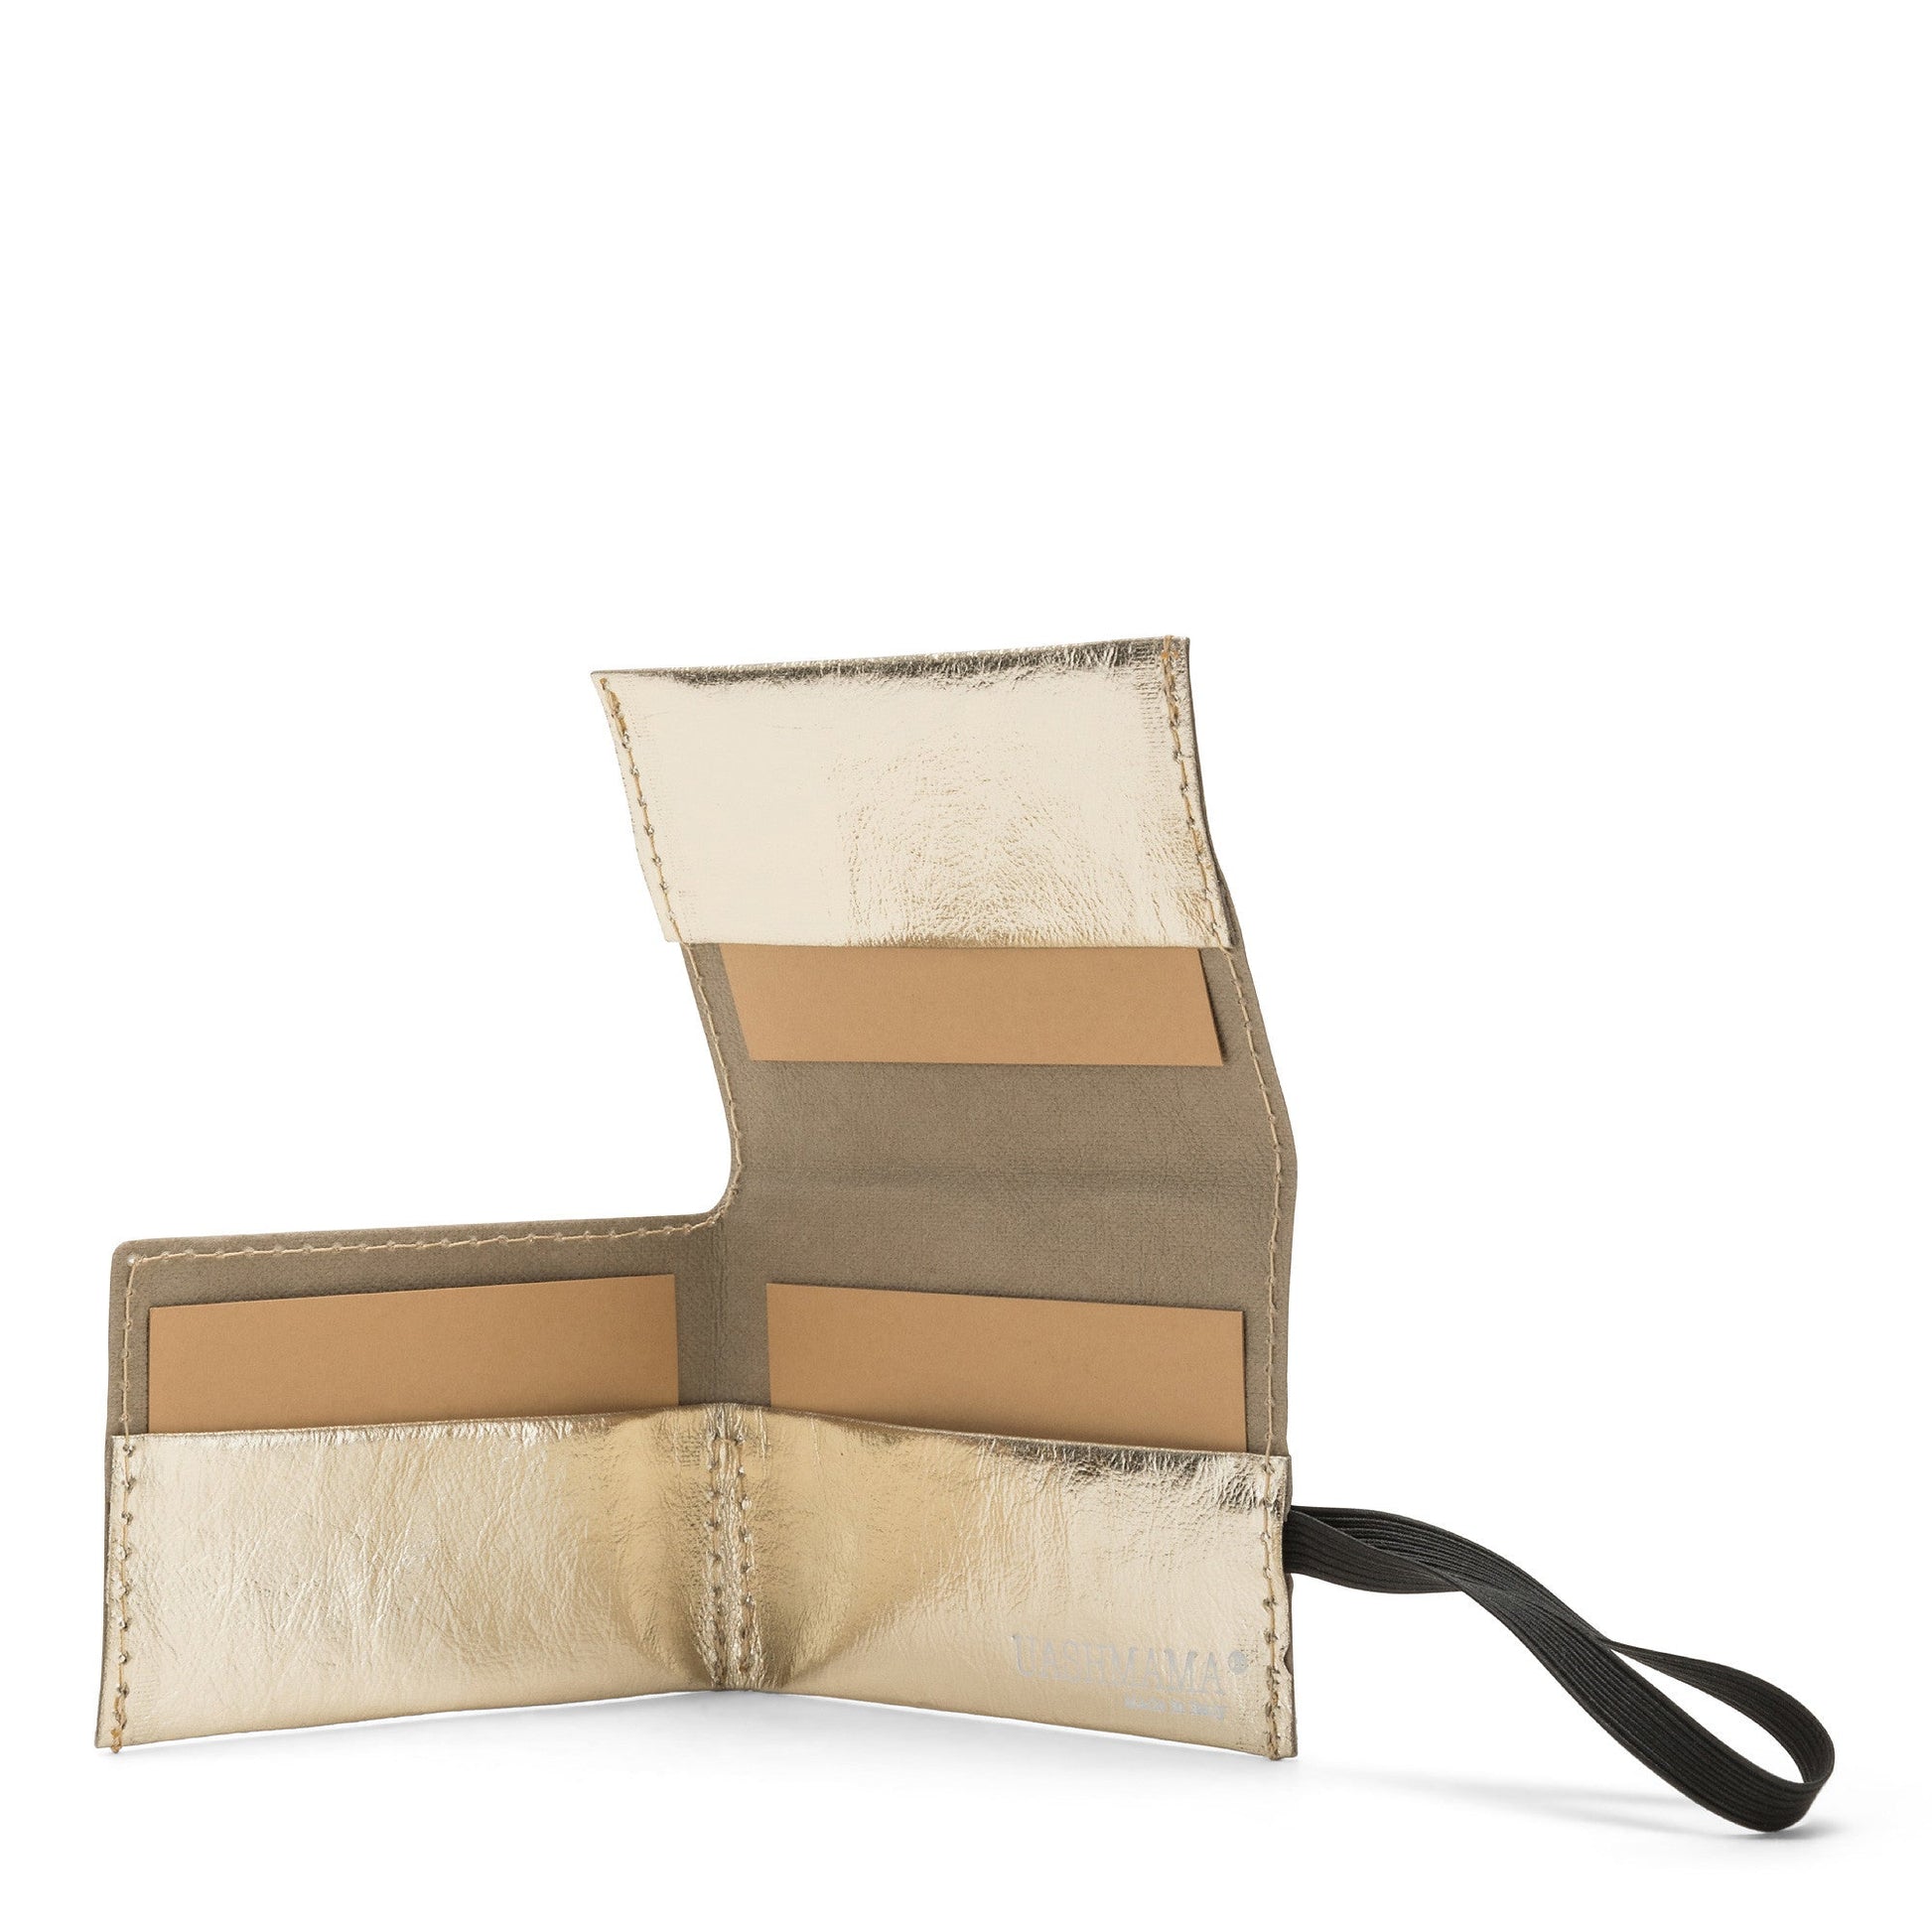 A gold metallic washable paper card holder is shown open from the front angle. It features a black elastic side strap and the white UASHMAMA logo stamped on the inside bottom right.